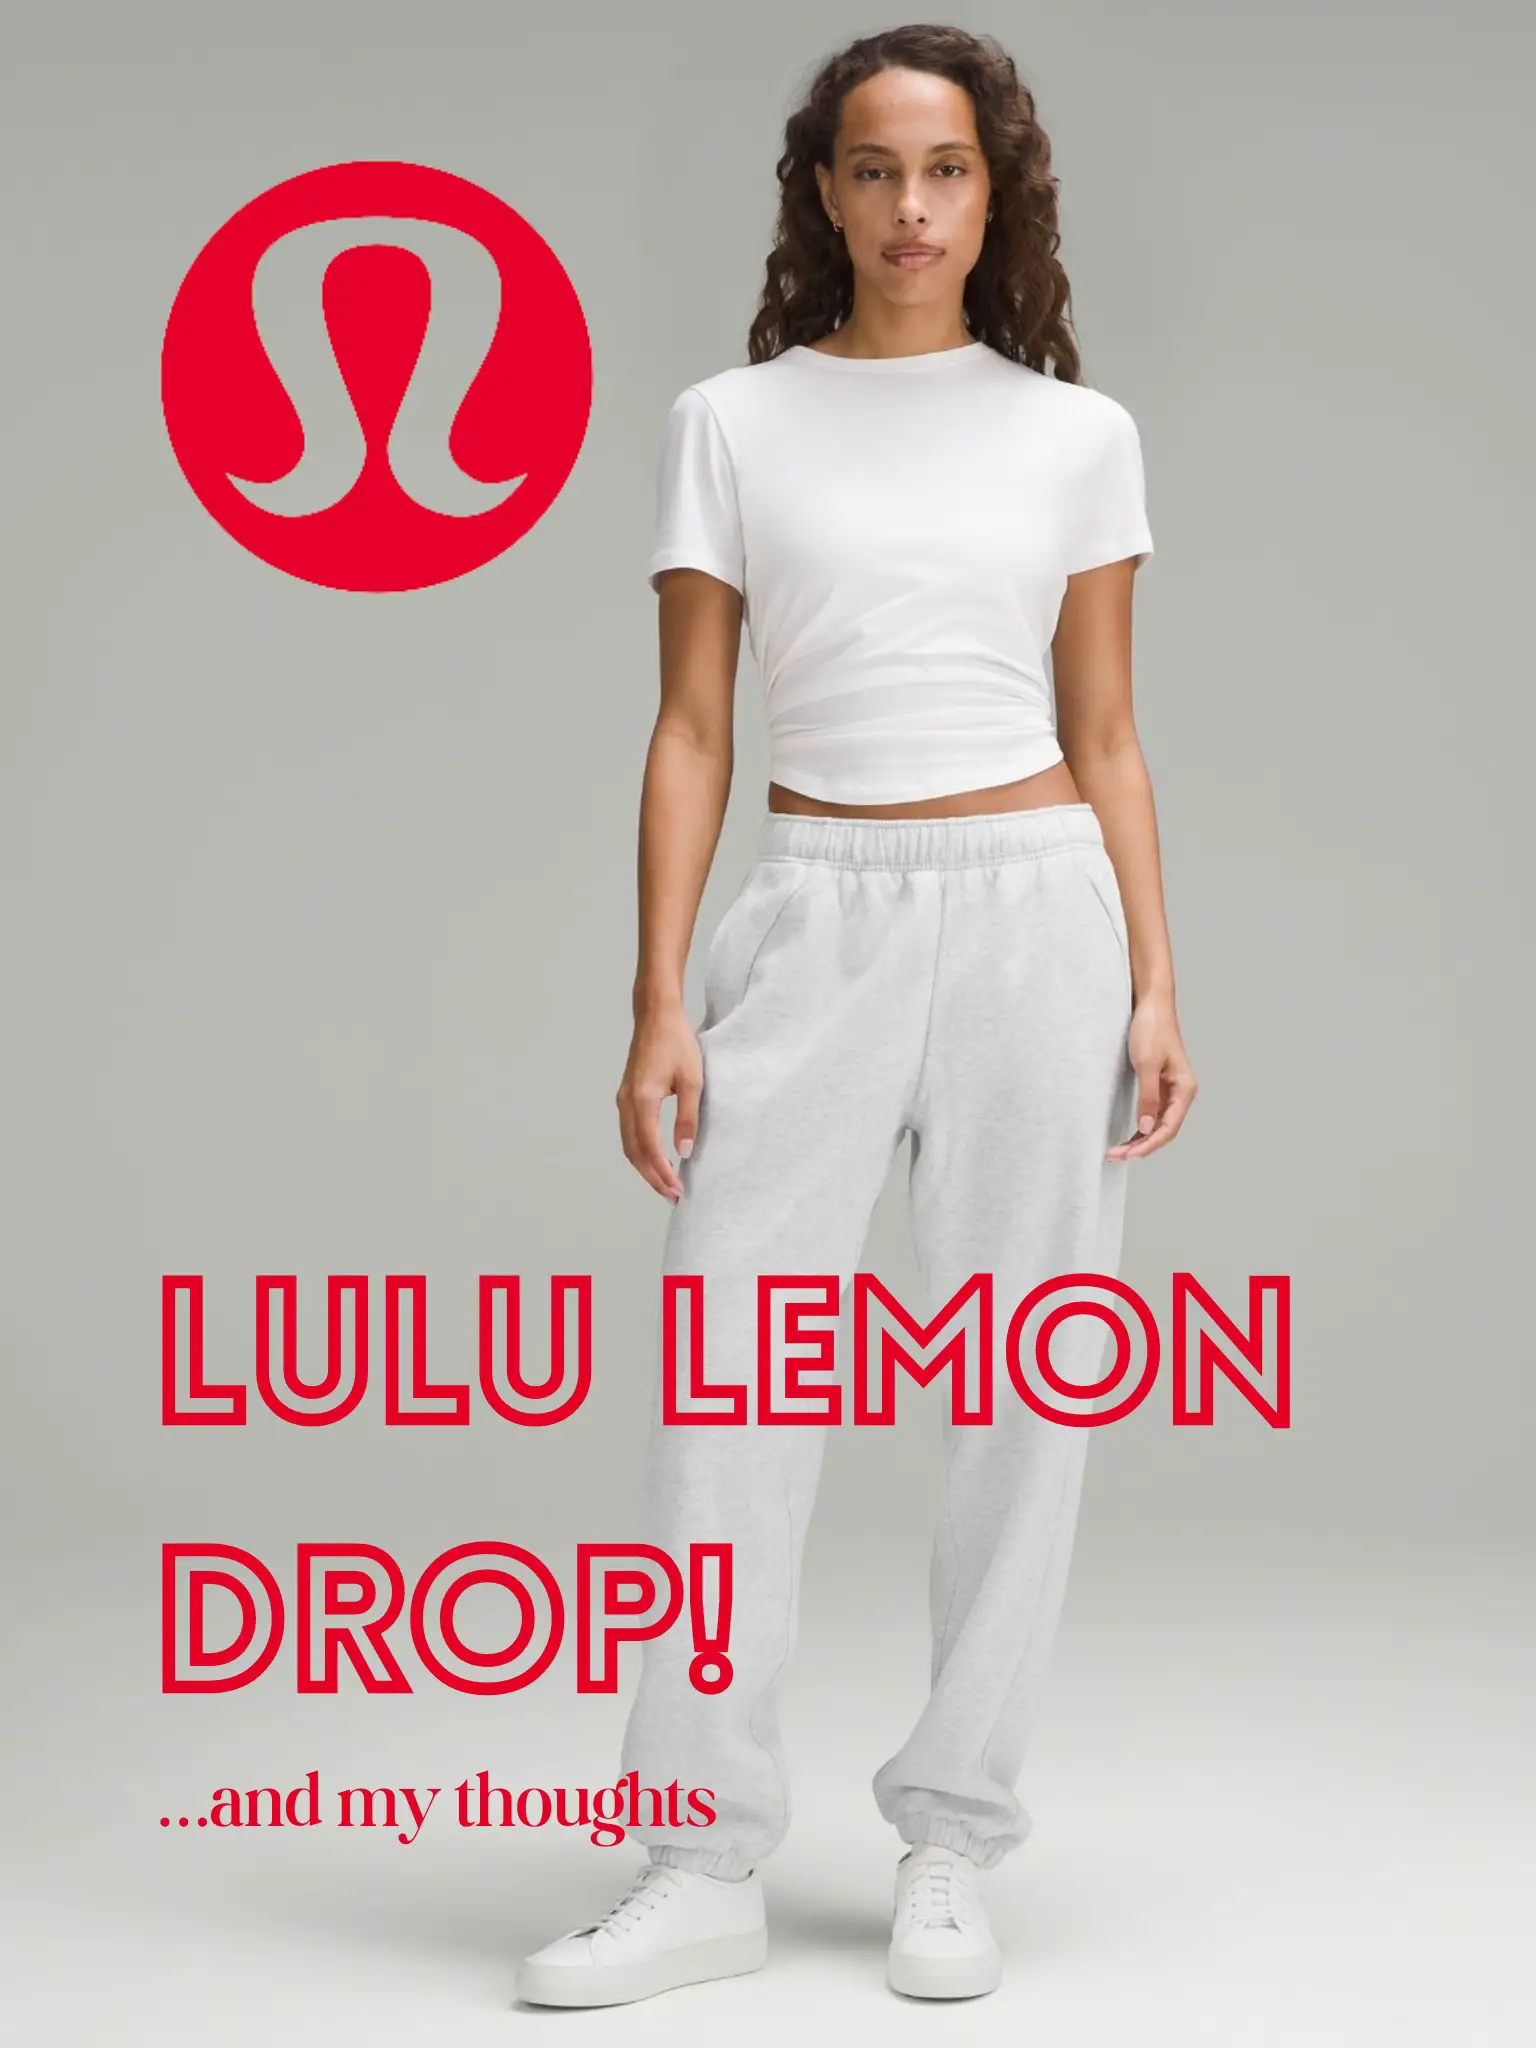 Who is gonna try this new sneaker?🥰 #lululemoncreator #lululemon